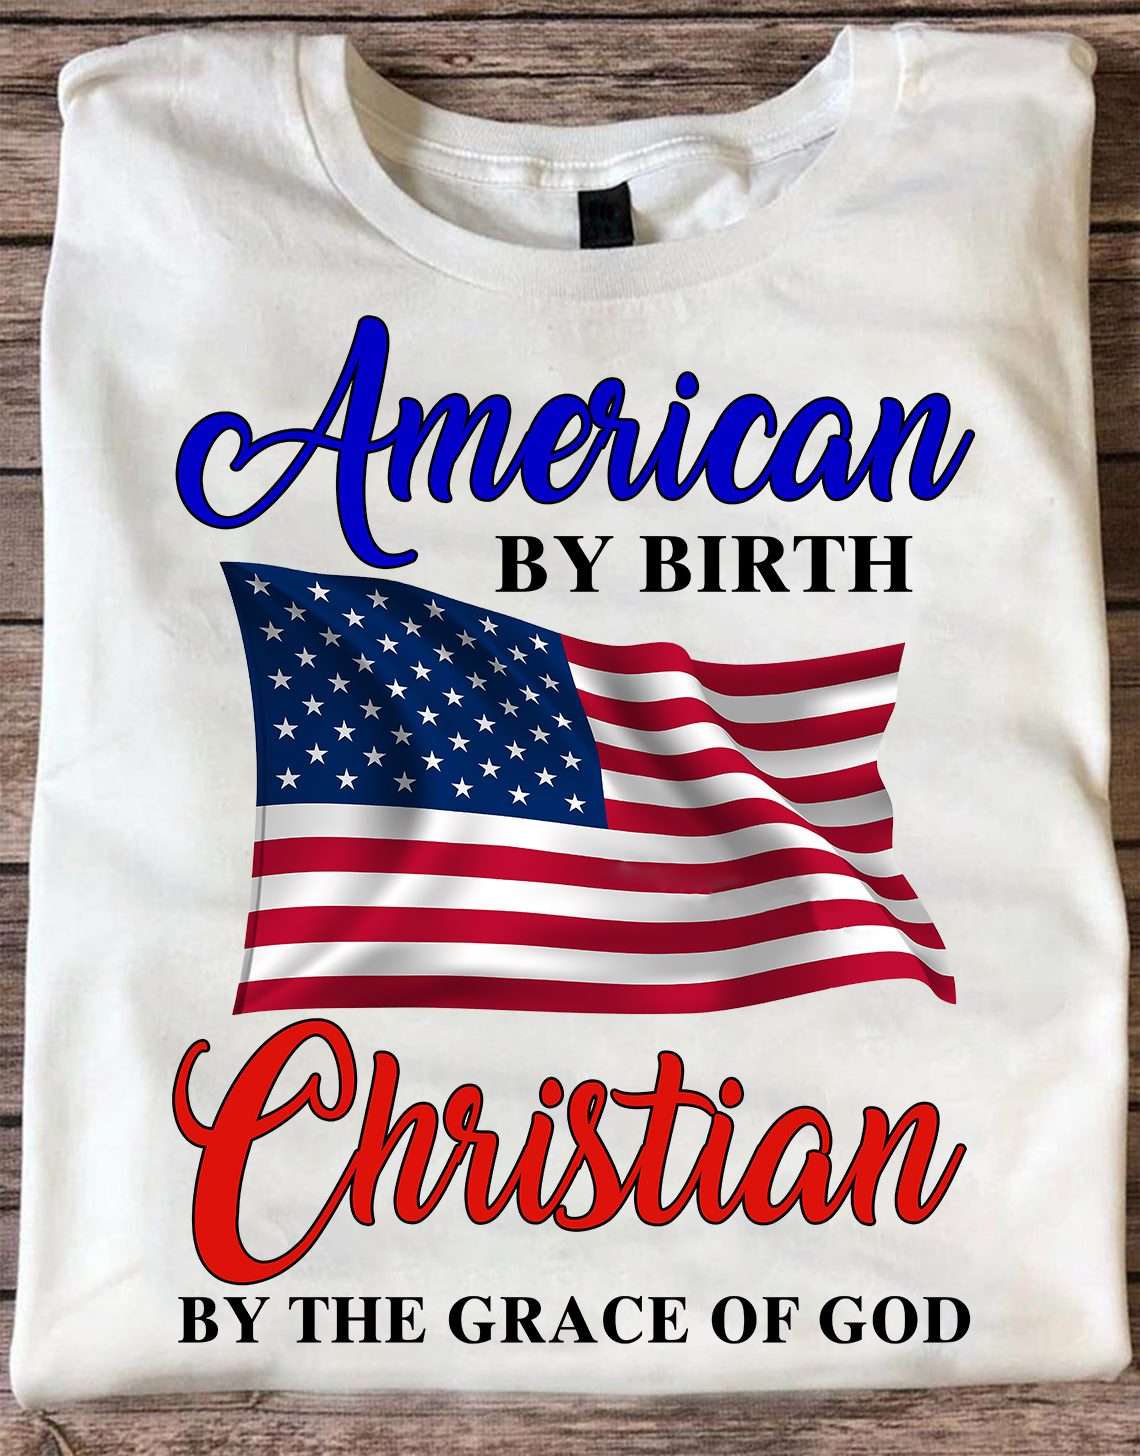 American by birth Christian by the grace of god - Jesus the god, American christian